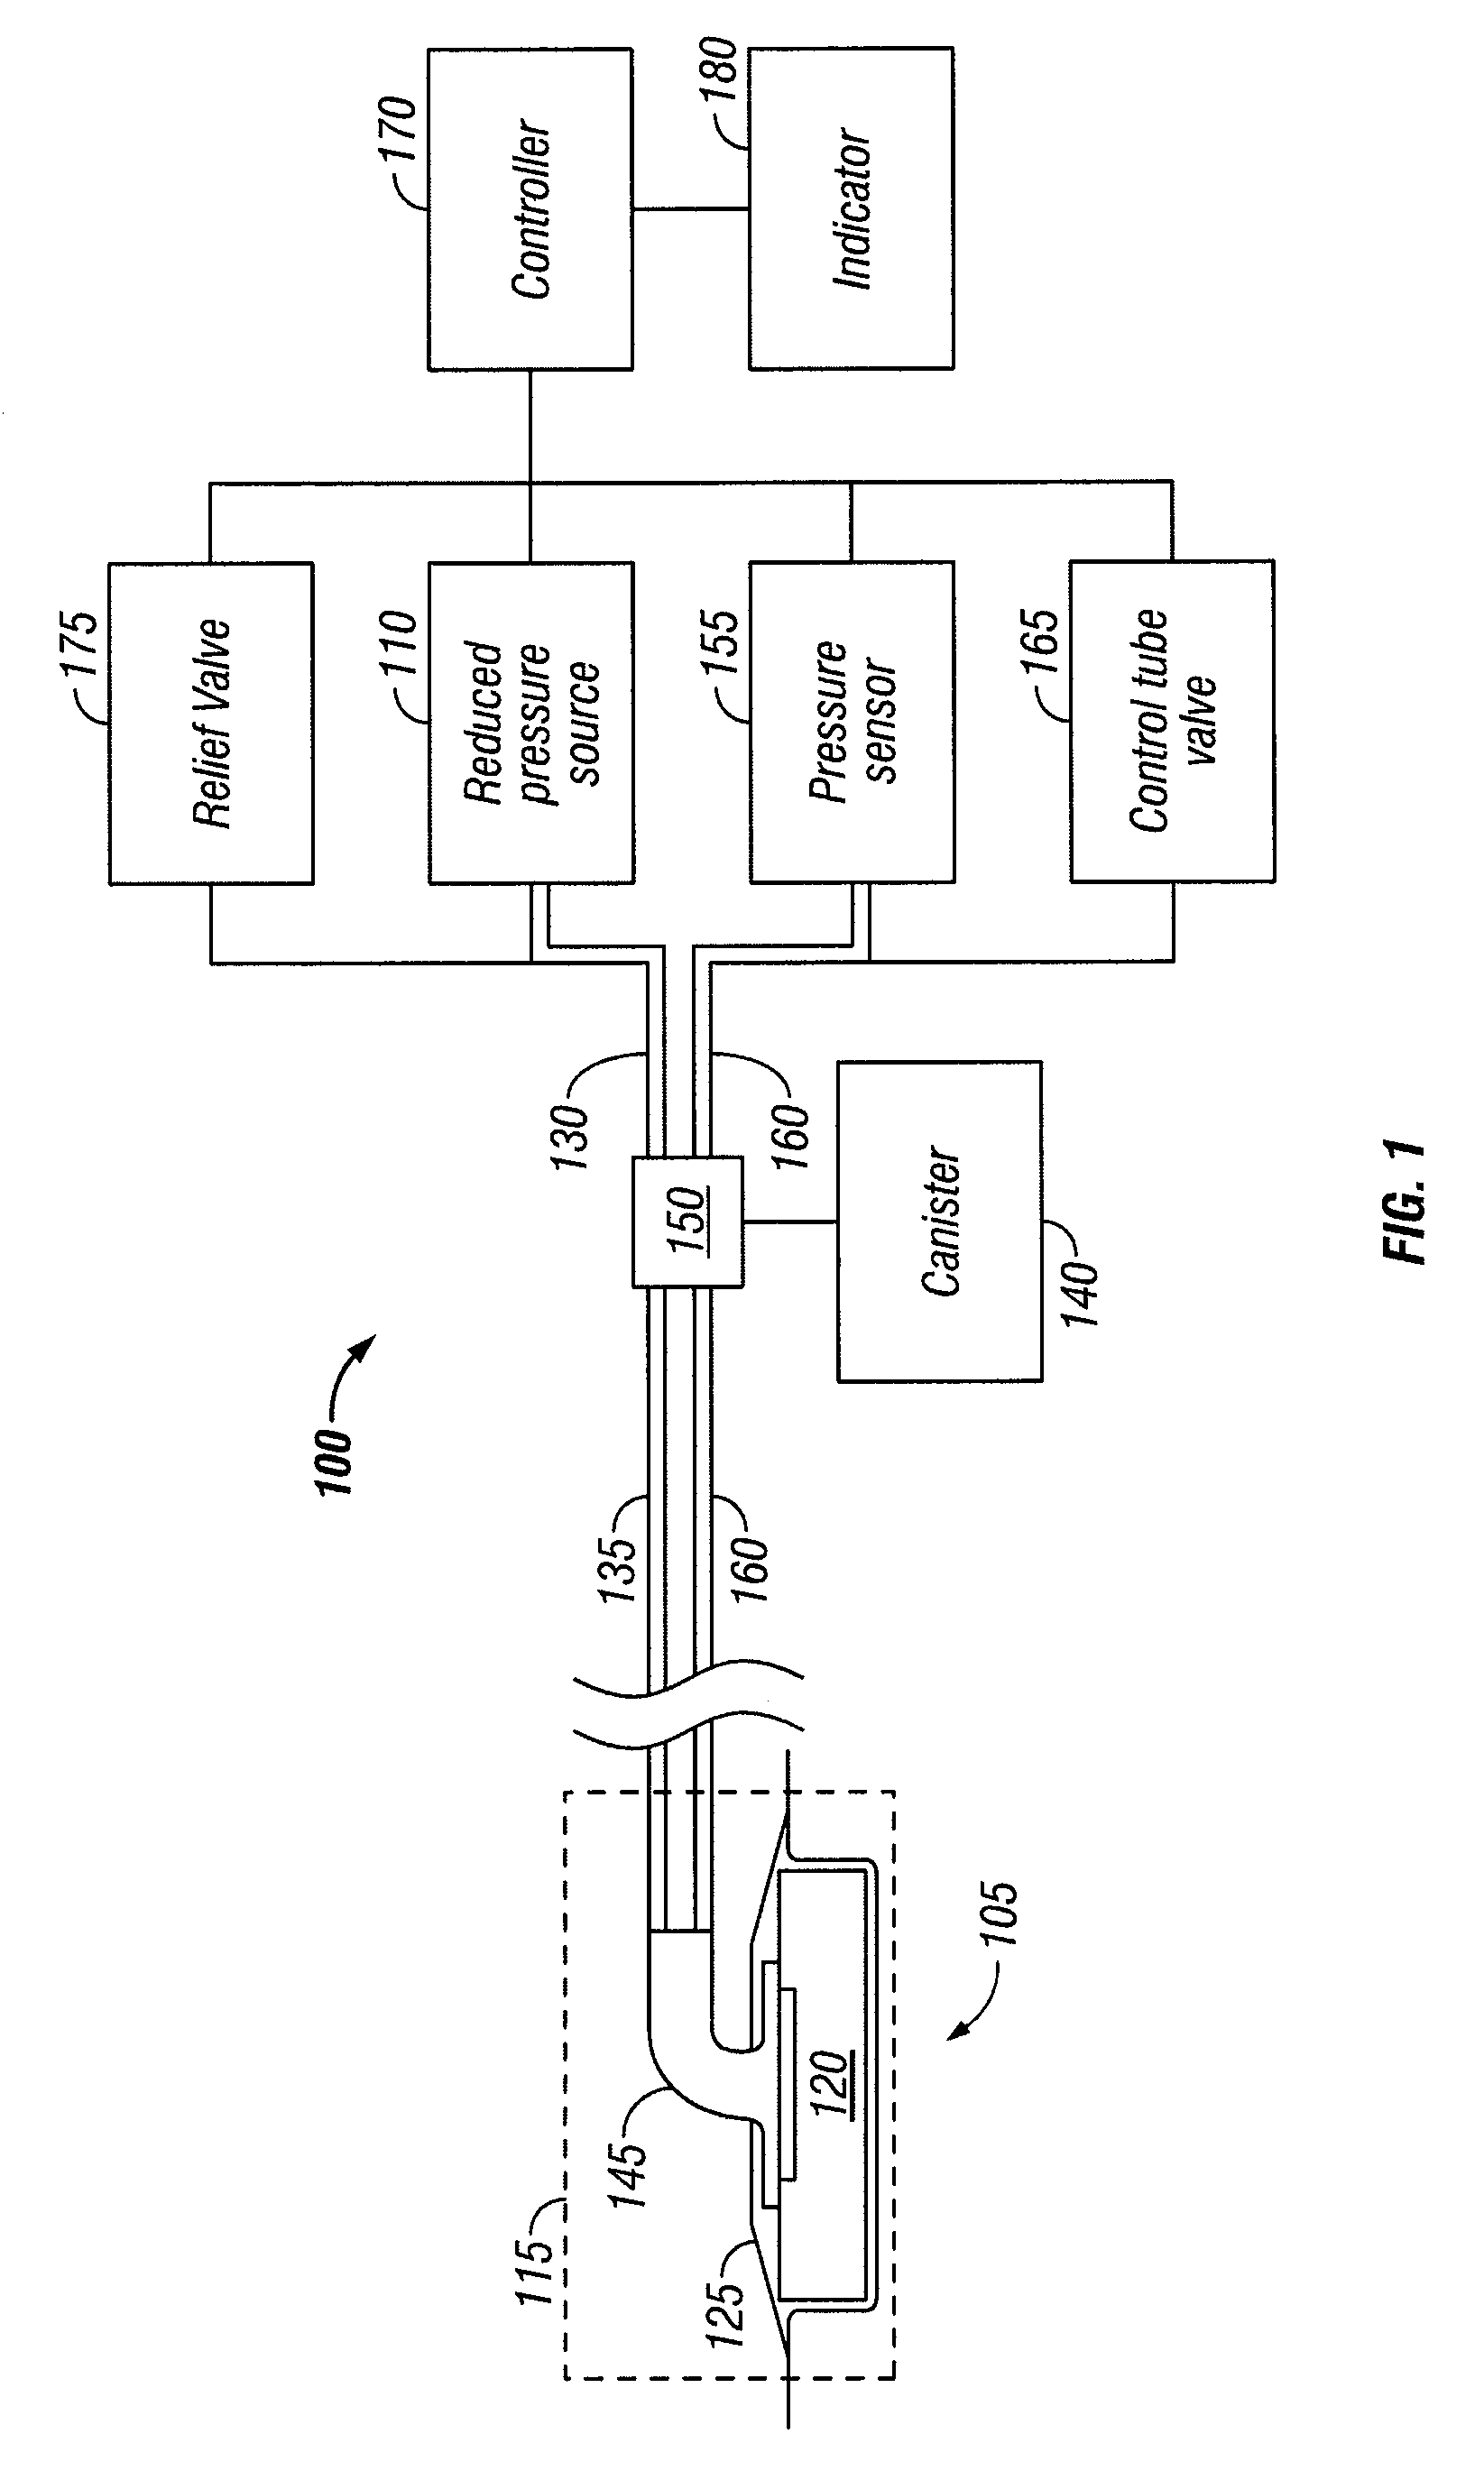 System and method for managing reduced pressure at a tissue site